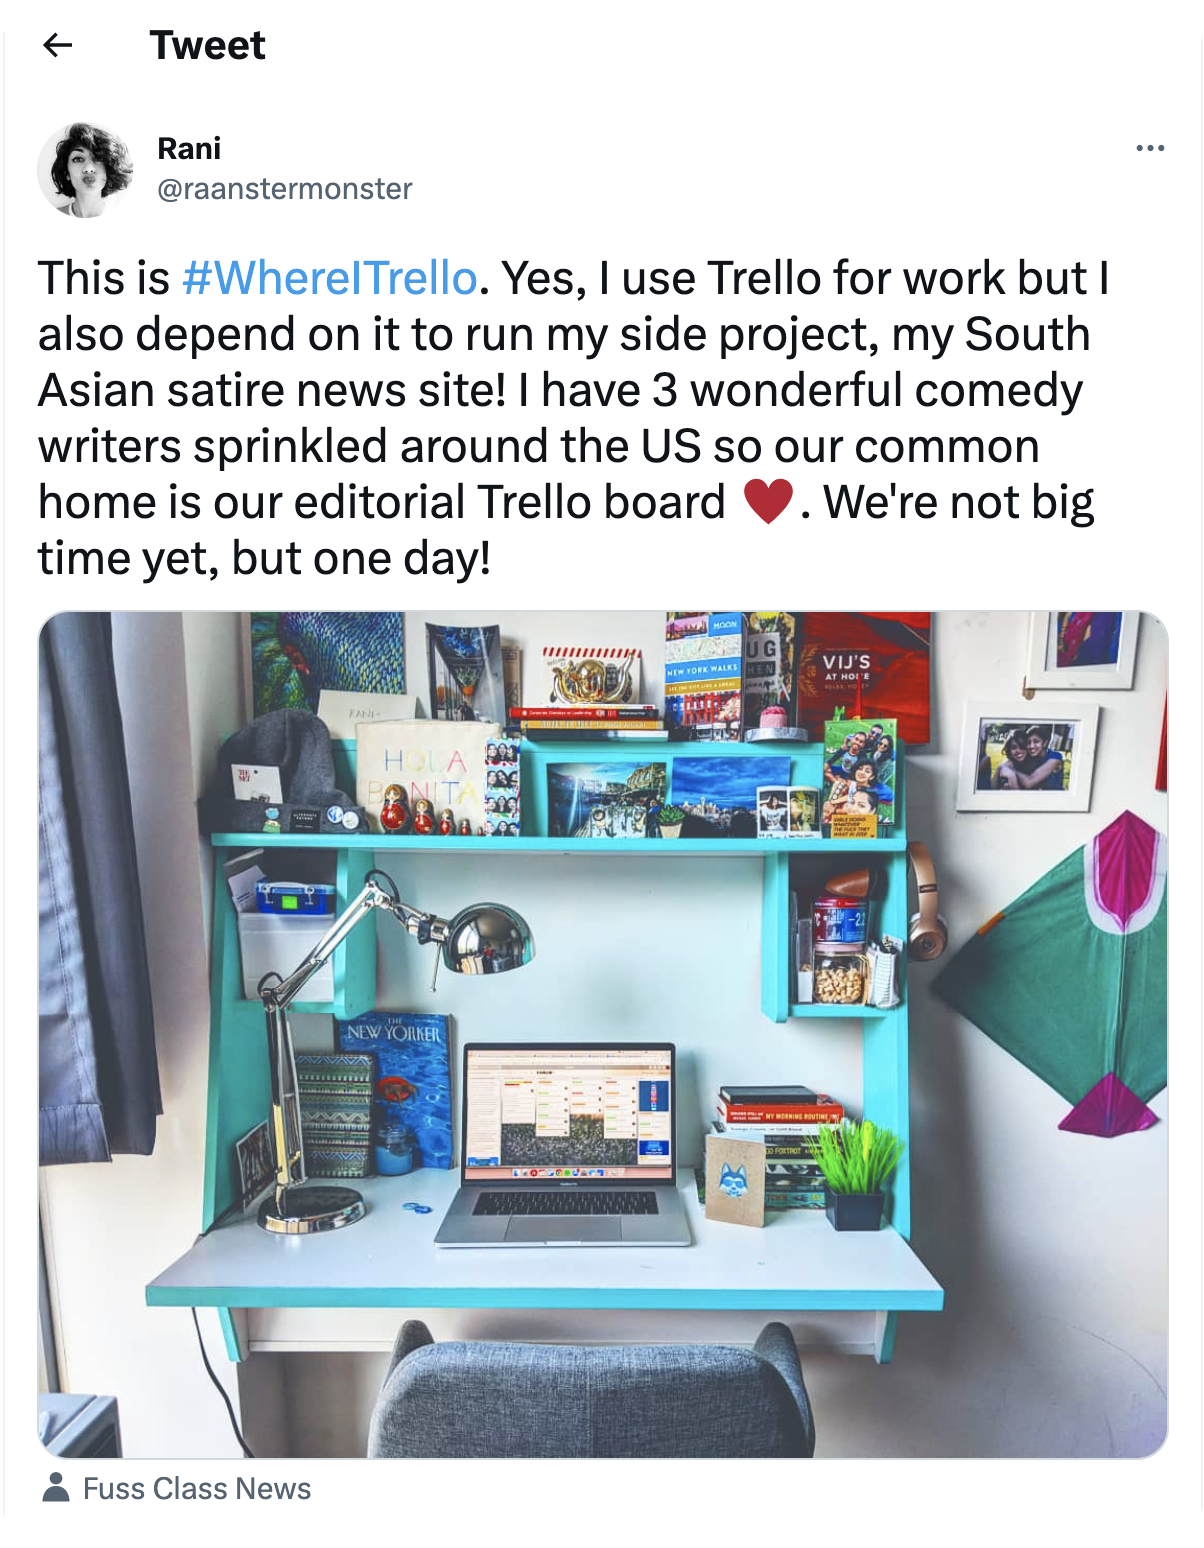 A Tweet from a Trello user with a pic of a laptop on a workstation. The laptop shows a news site, and the Tweet caption says that Tweeter uses Trello for work and their satire news site, and they hope to make it big one day.